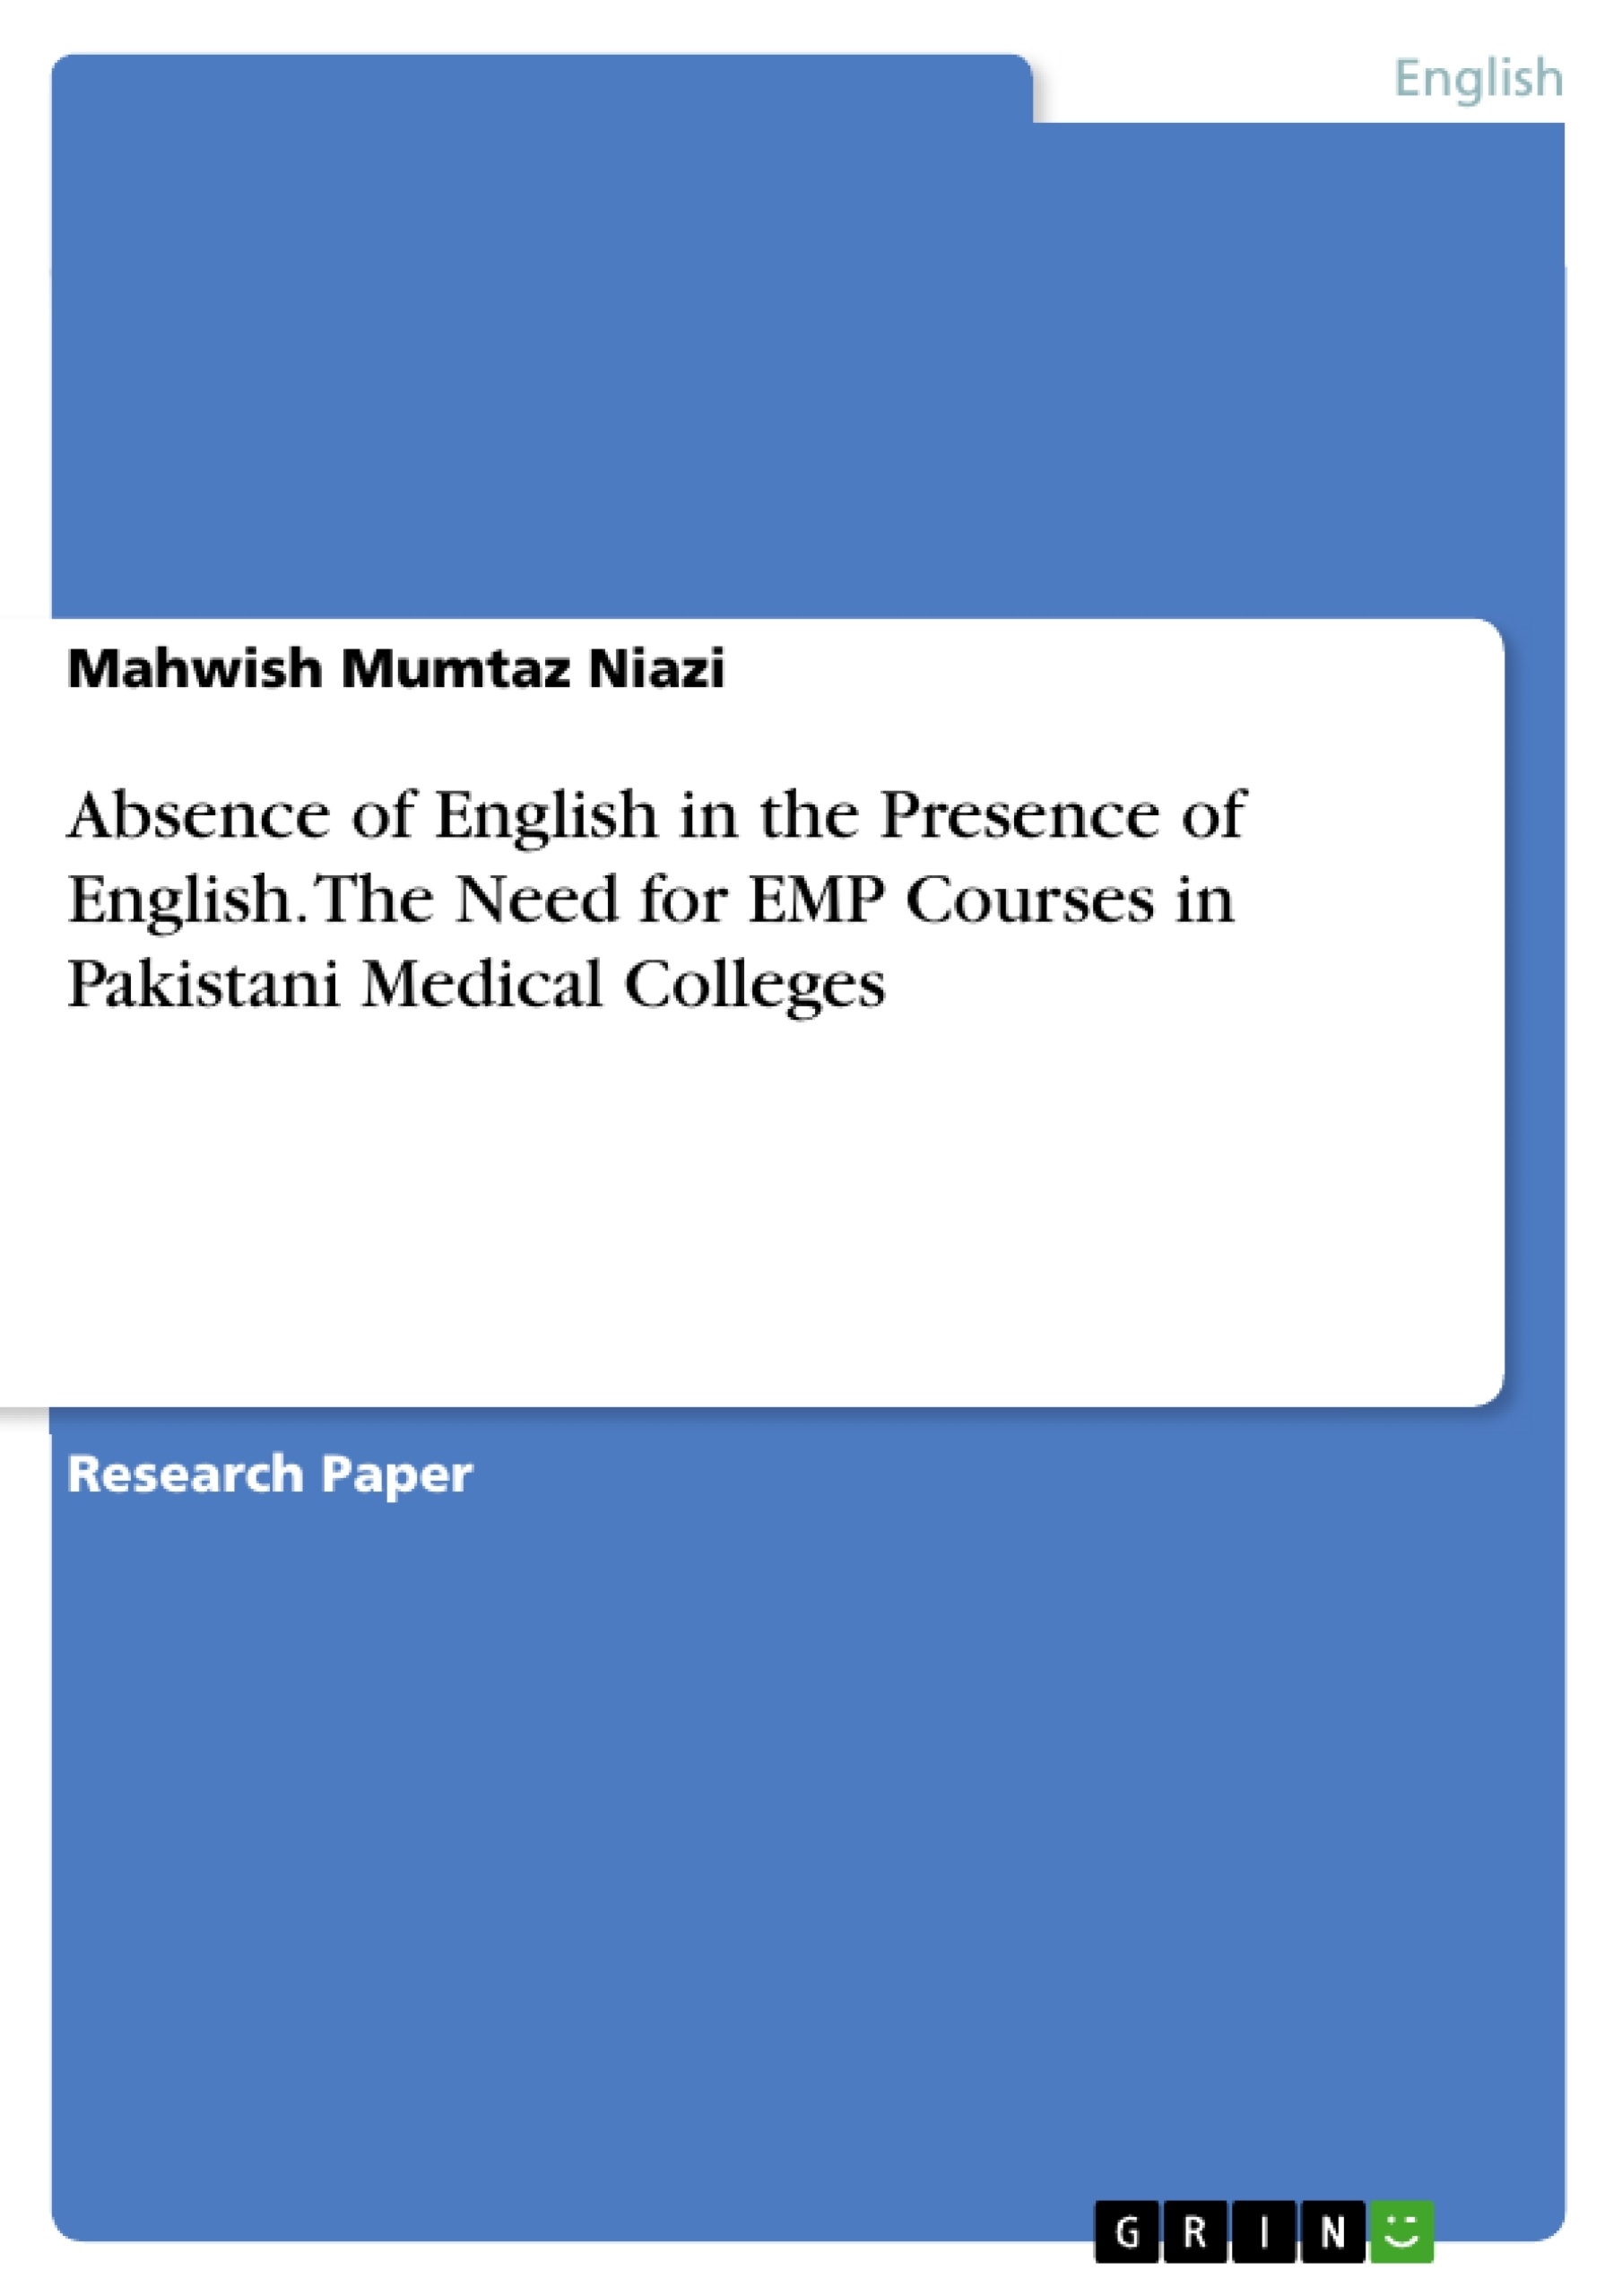 Titre: Absence of English in the Presence of English. The Need for EMP Courses in Pakistani Medical Colleges